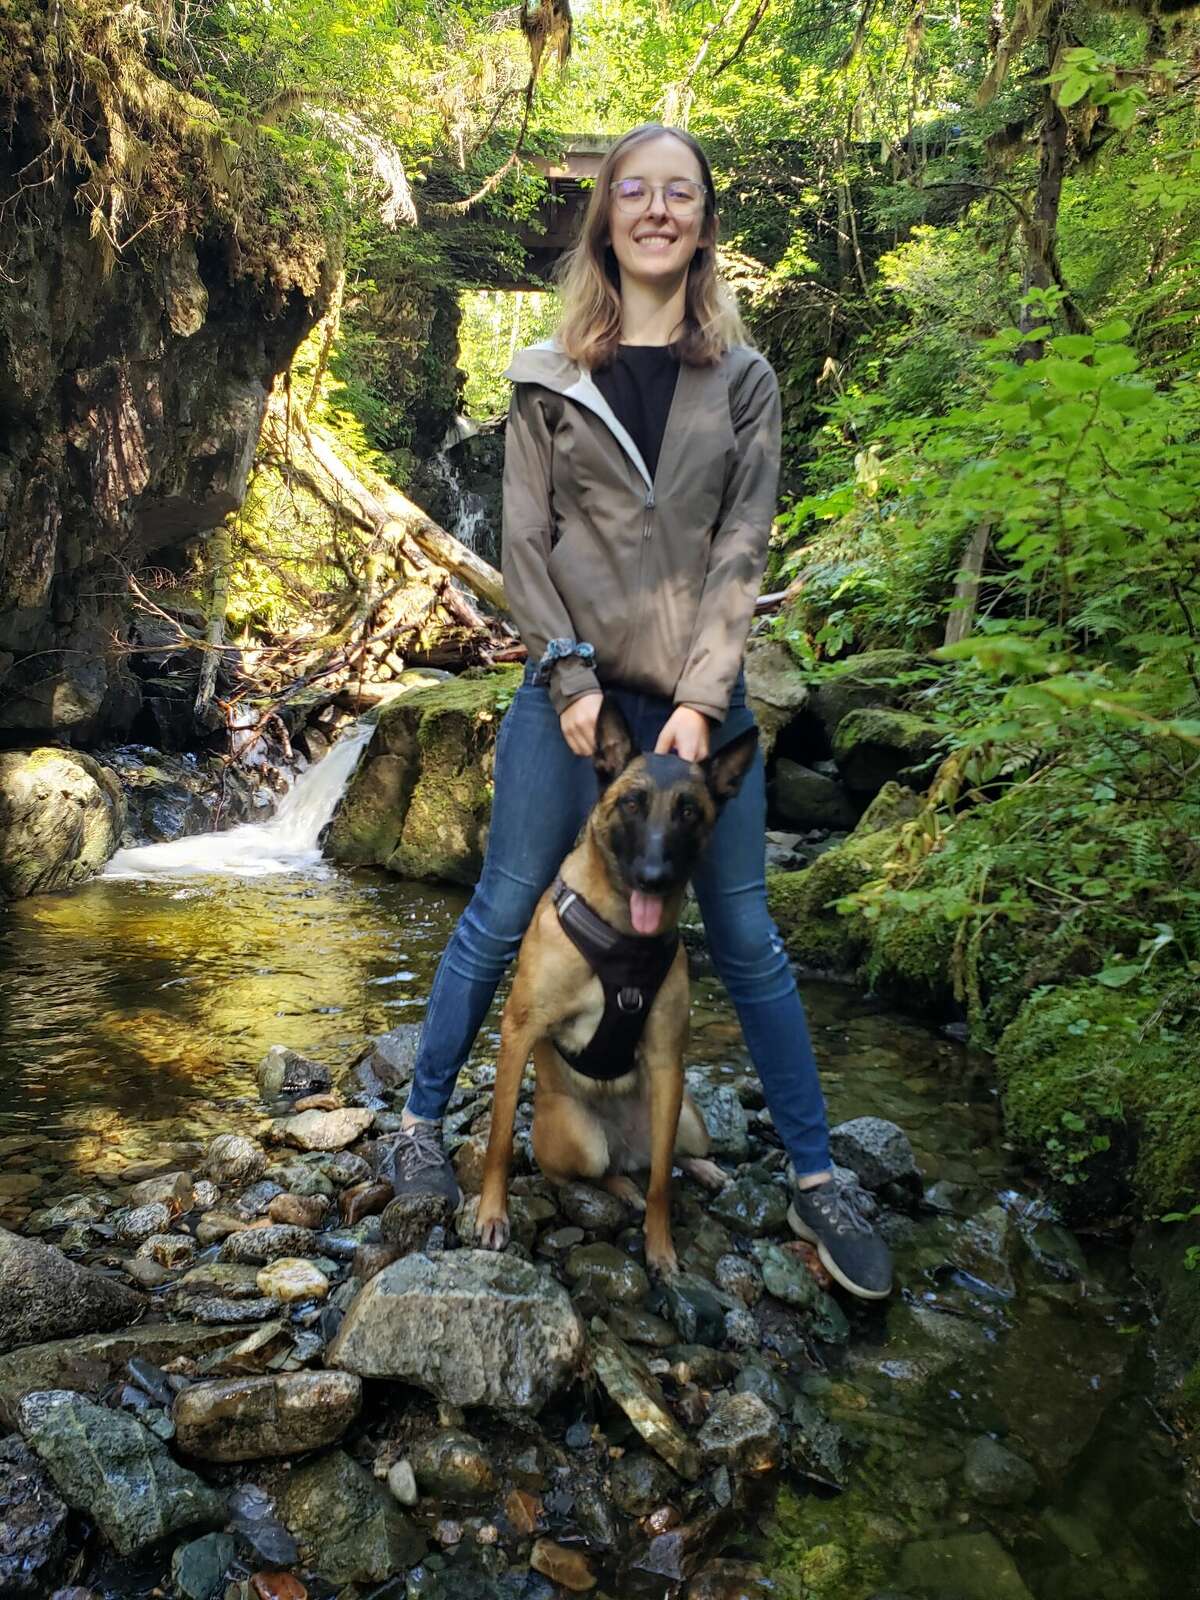 Erin Wilson and her dog Eva, who came to the rescue when a mountain lion attacked.